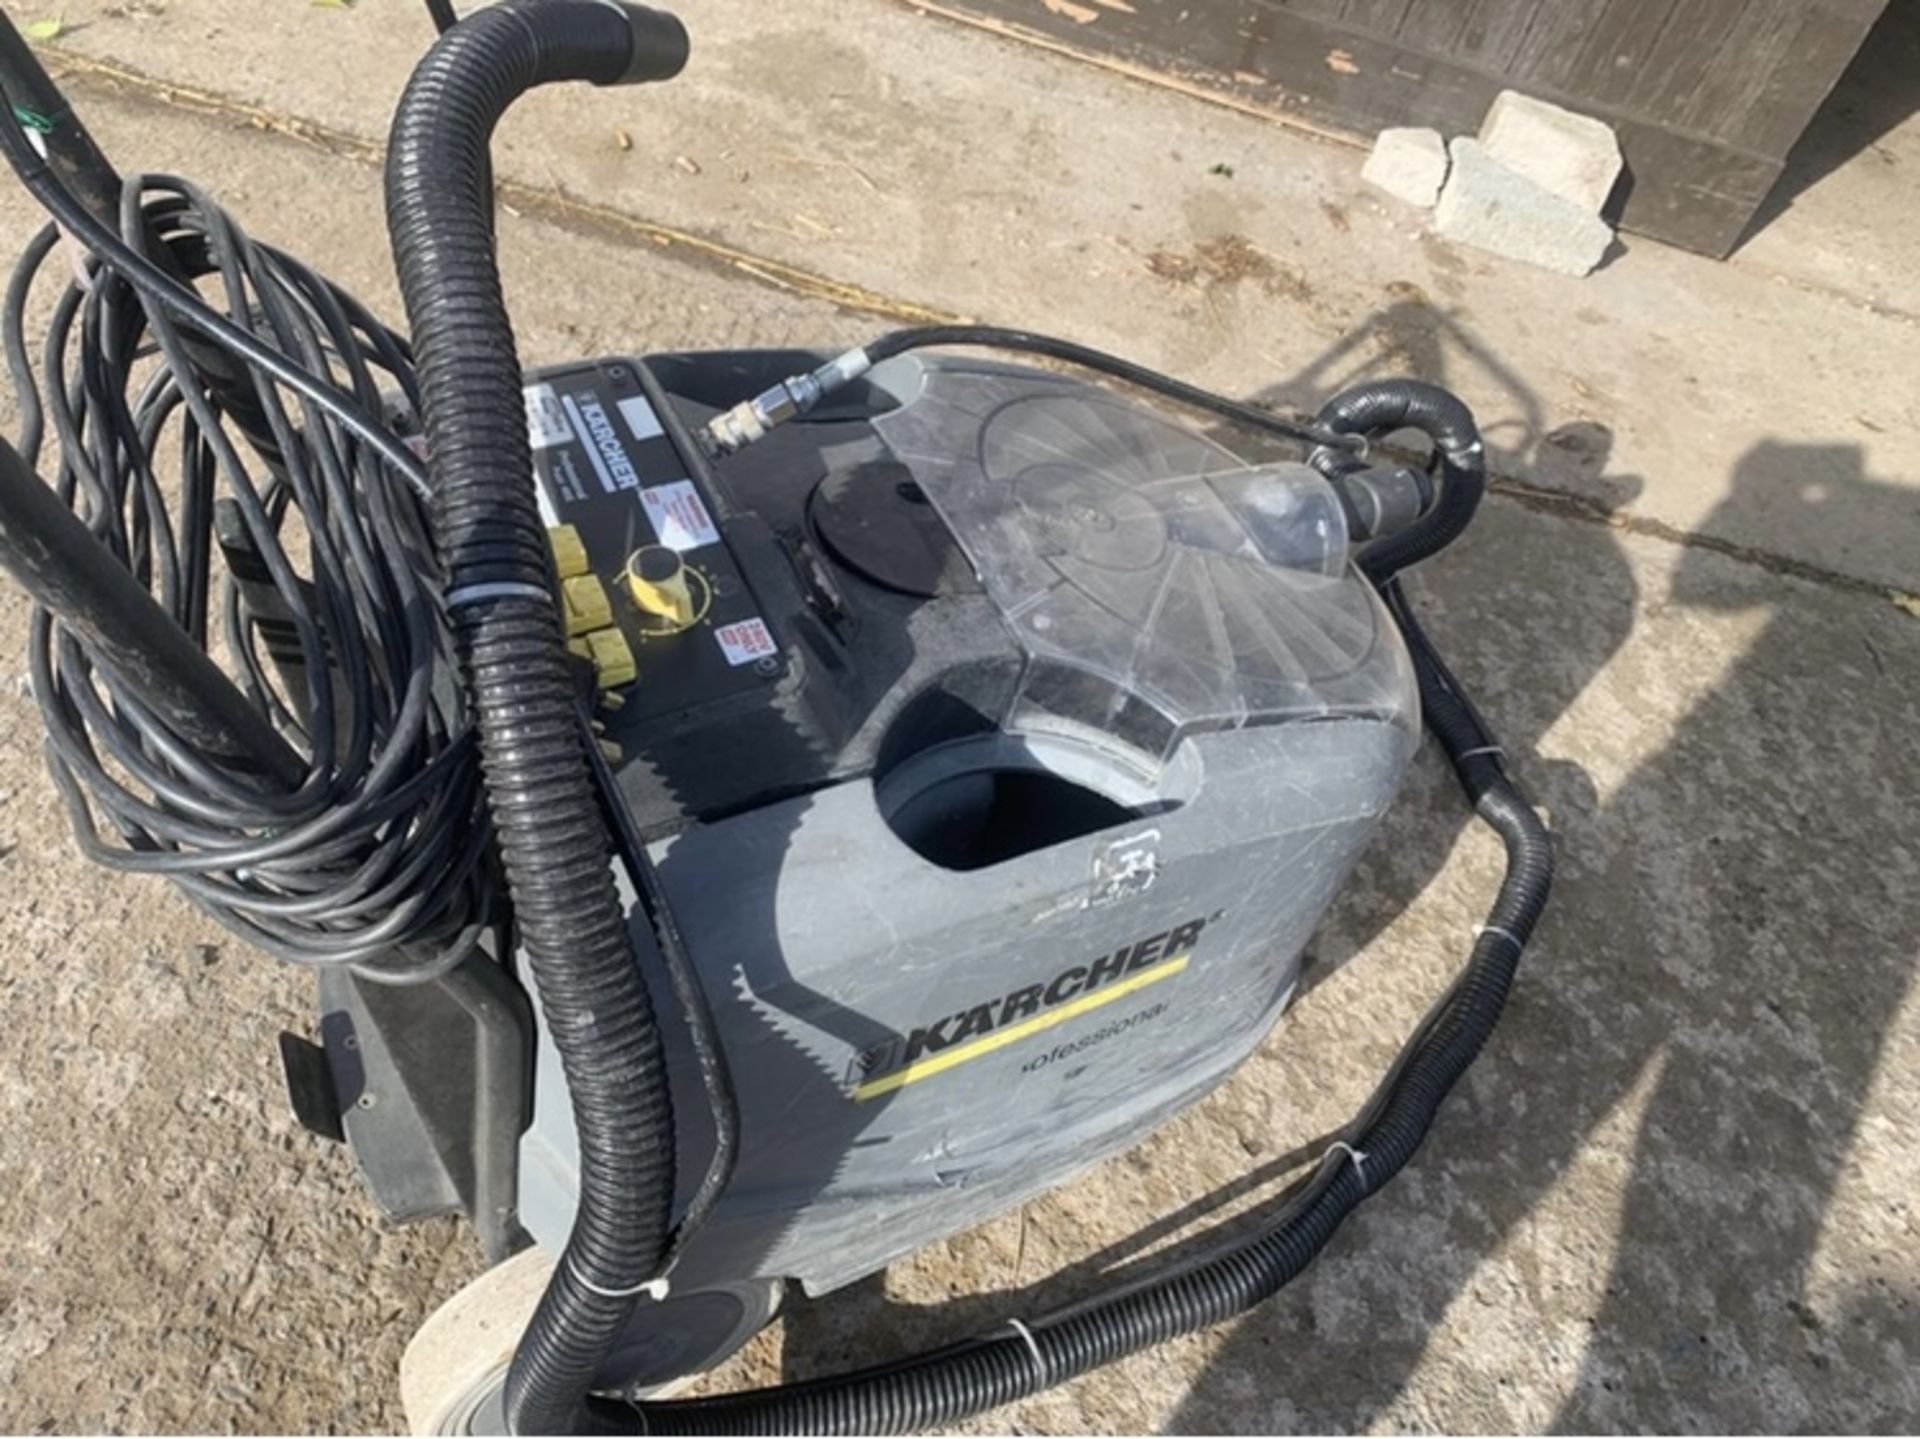 KARCHER WET AND DRY COMMERCIAL PUZZI 240V LOCATION N IRELAND - Image 4 of 4